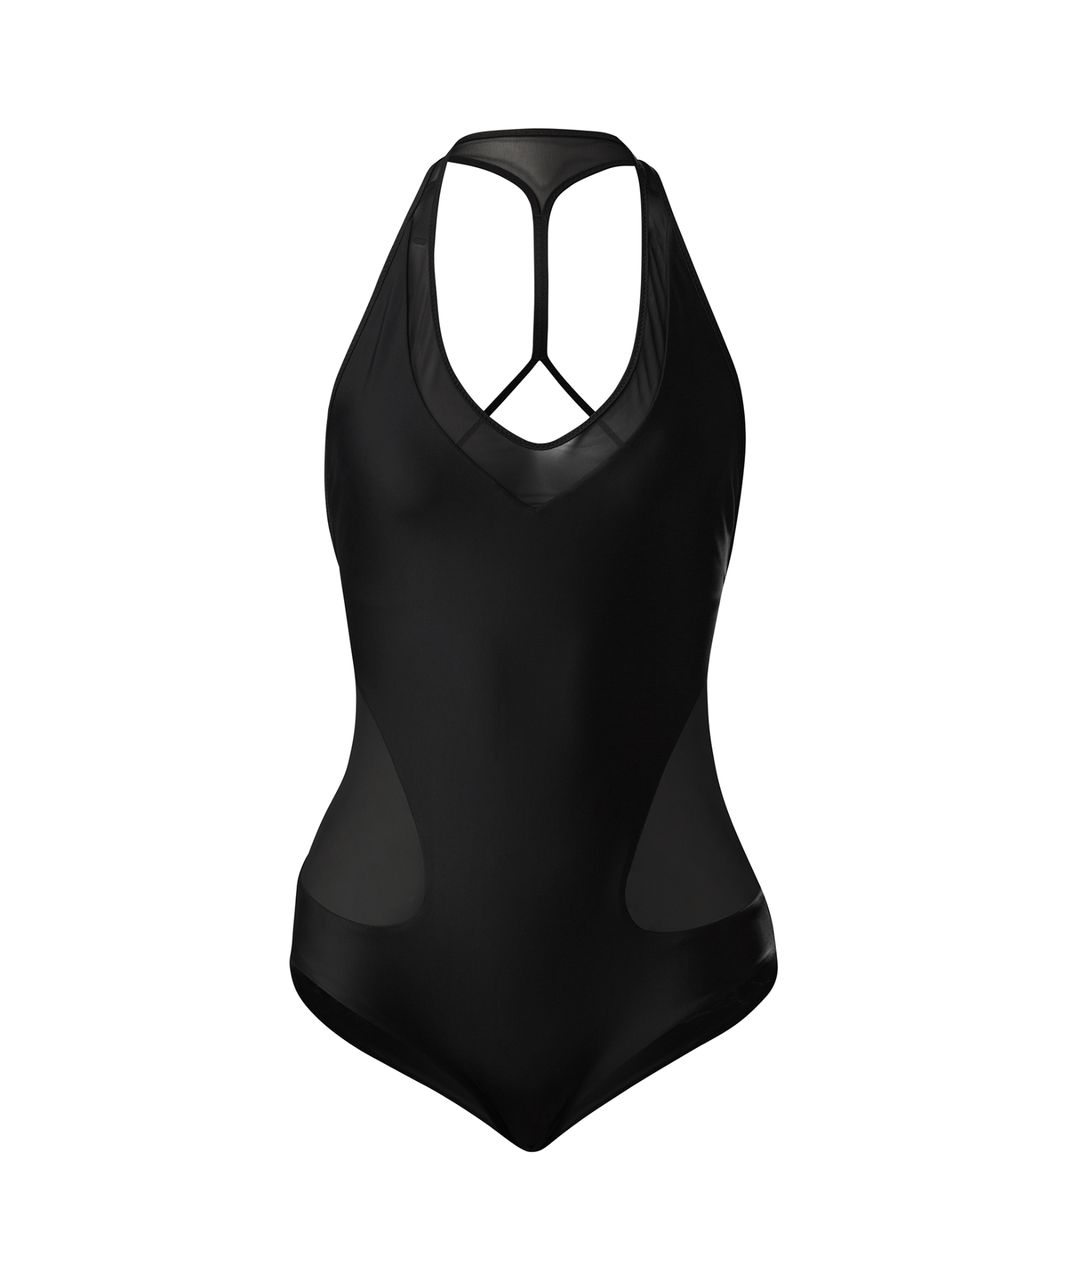 Lululemon Go With The Flow One Piece - Black